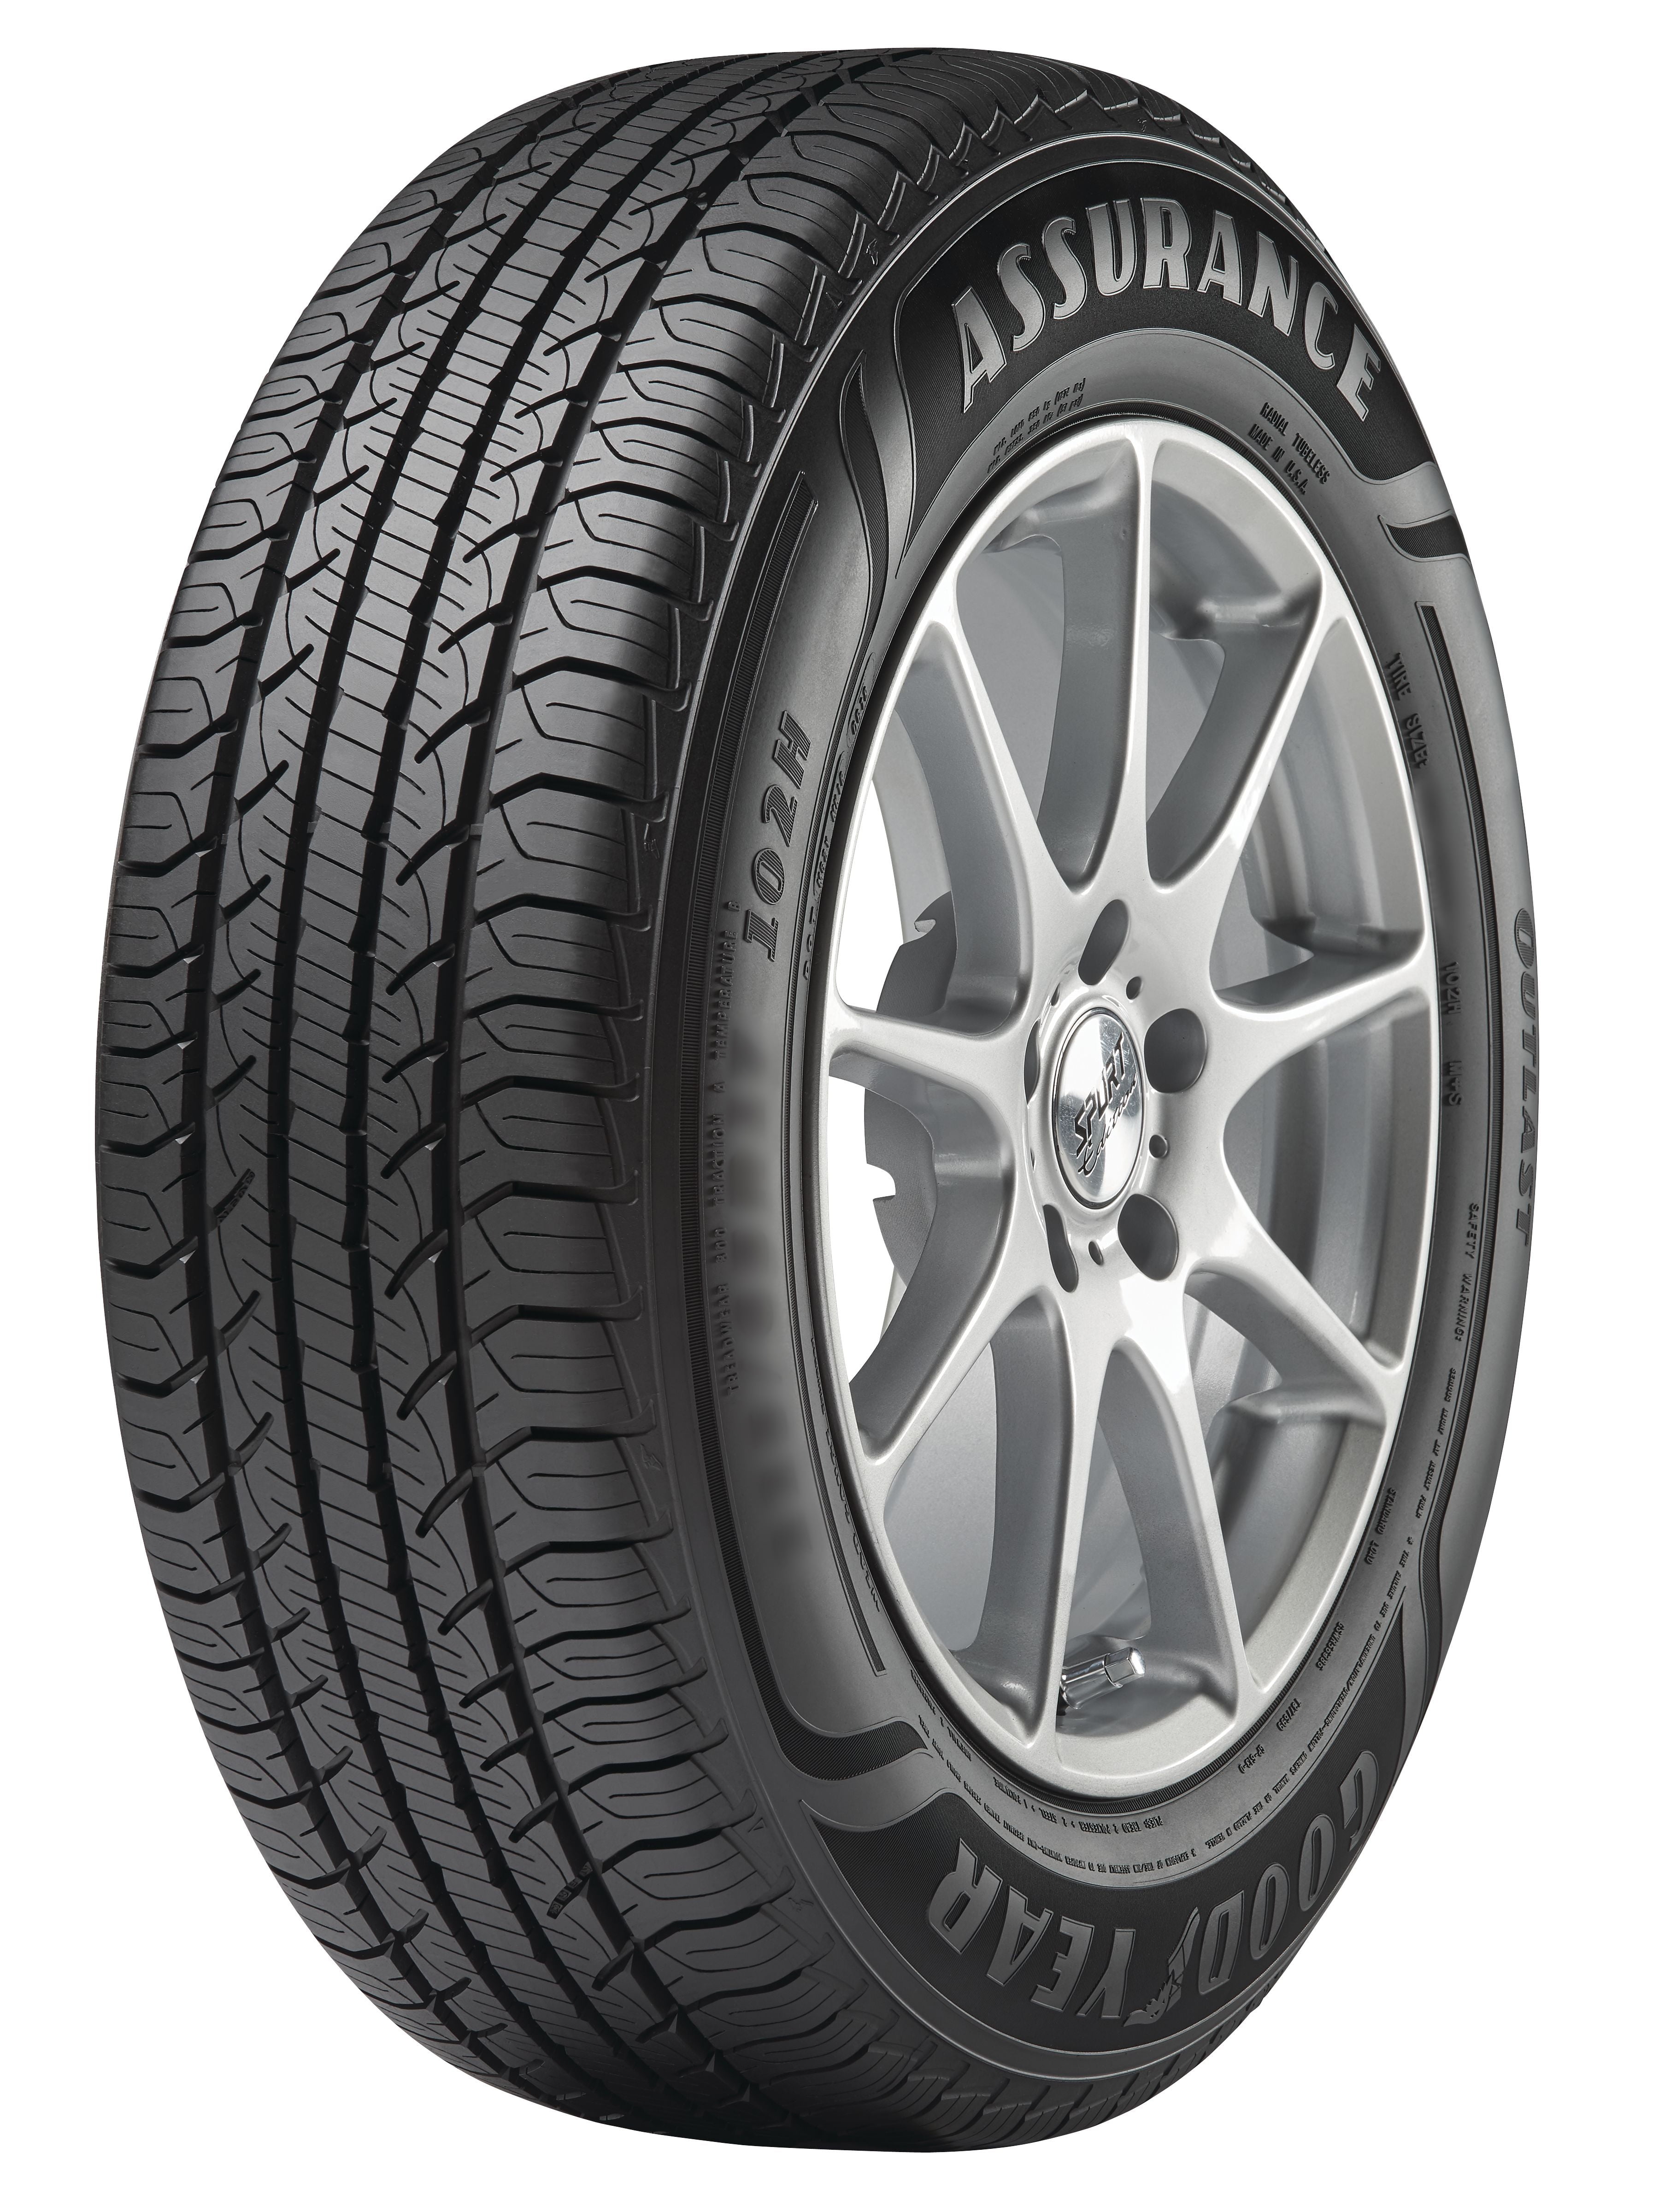 2x 225 55 17 225/55R17 Debica 2 New XL Tyres Goodyear-Made AMAZING 'A' Wet Grip 